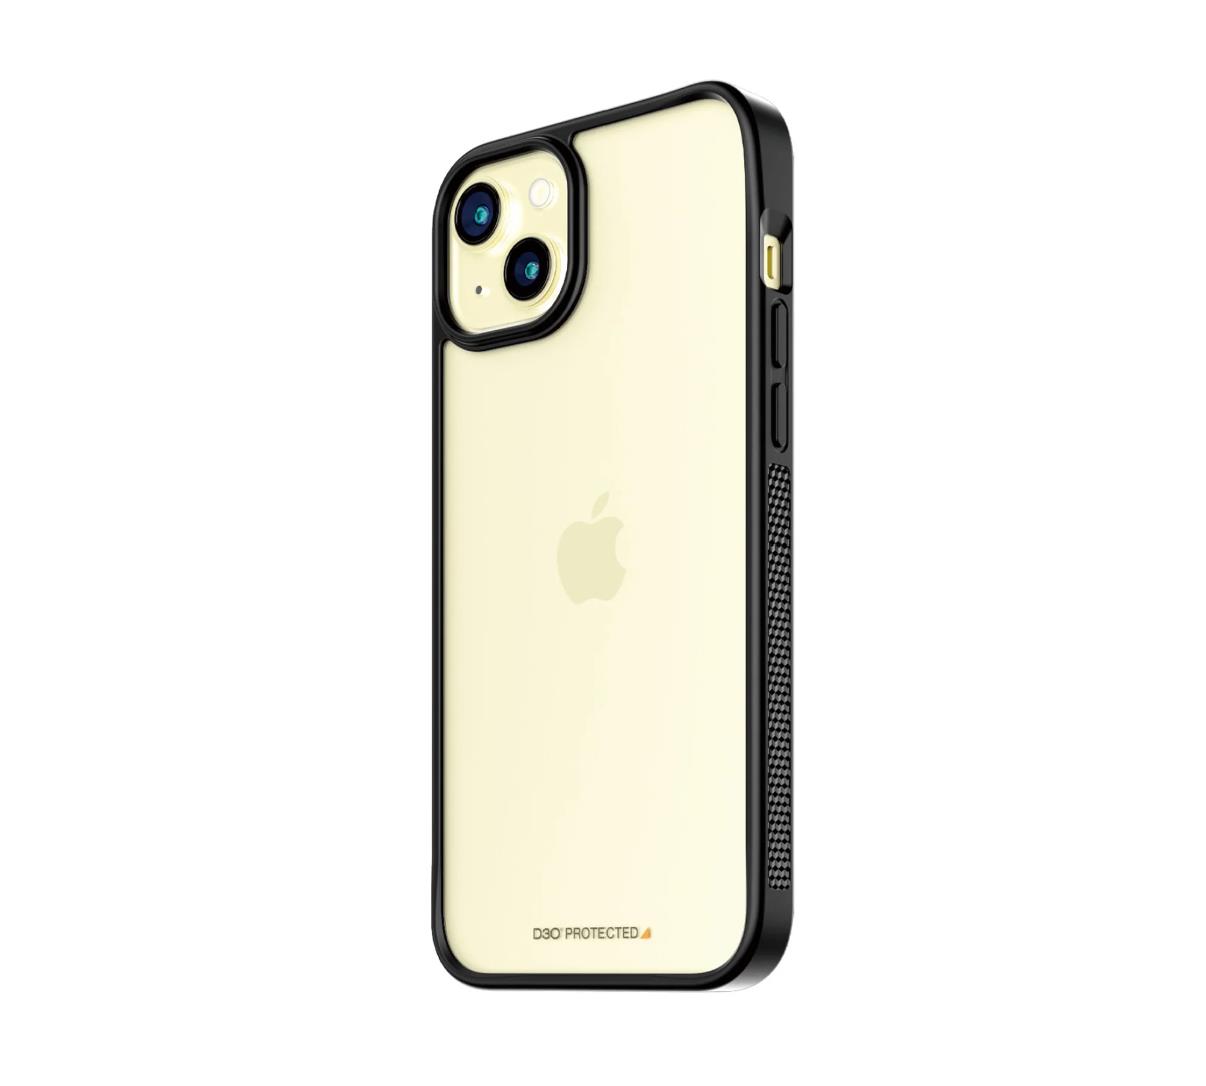 PanzerGlass™ ClearCase with D3O iPhone 15 Plus